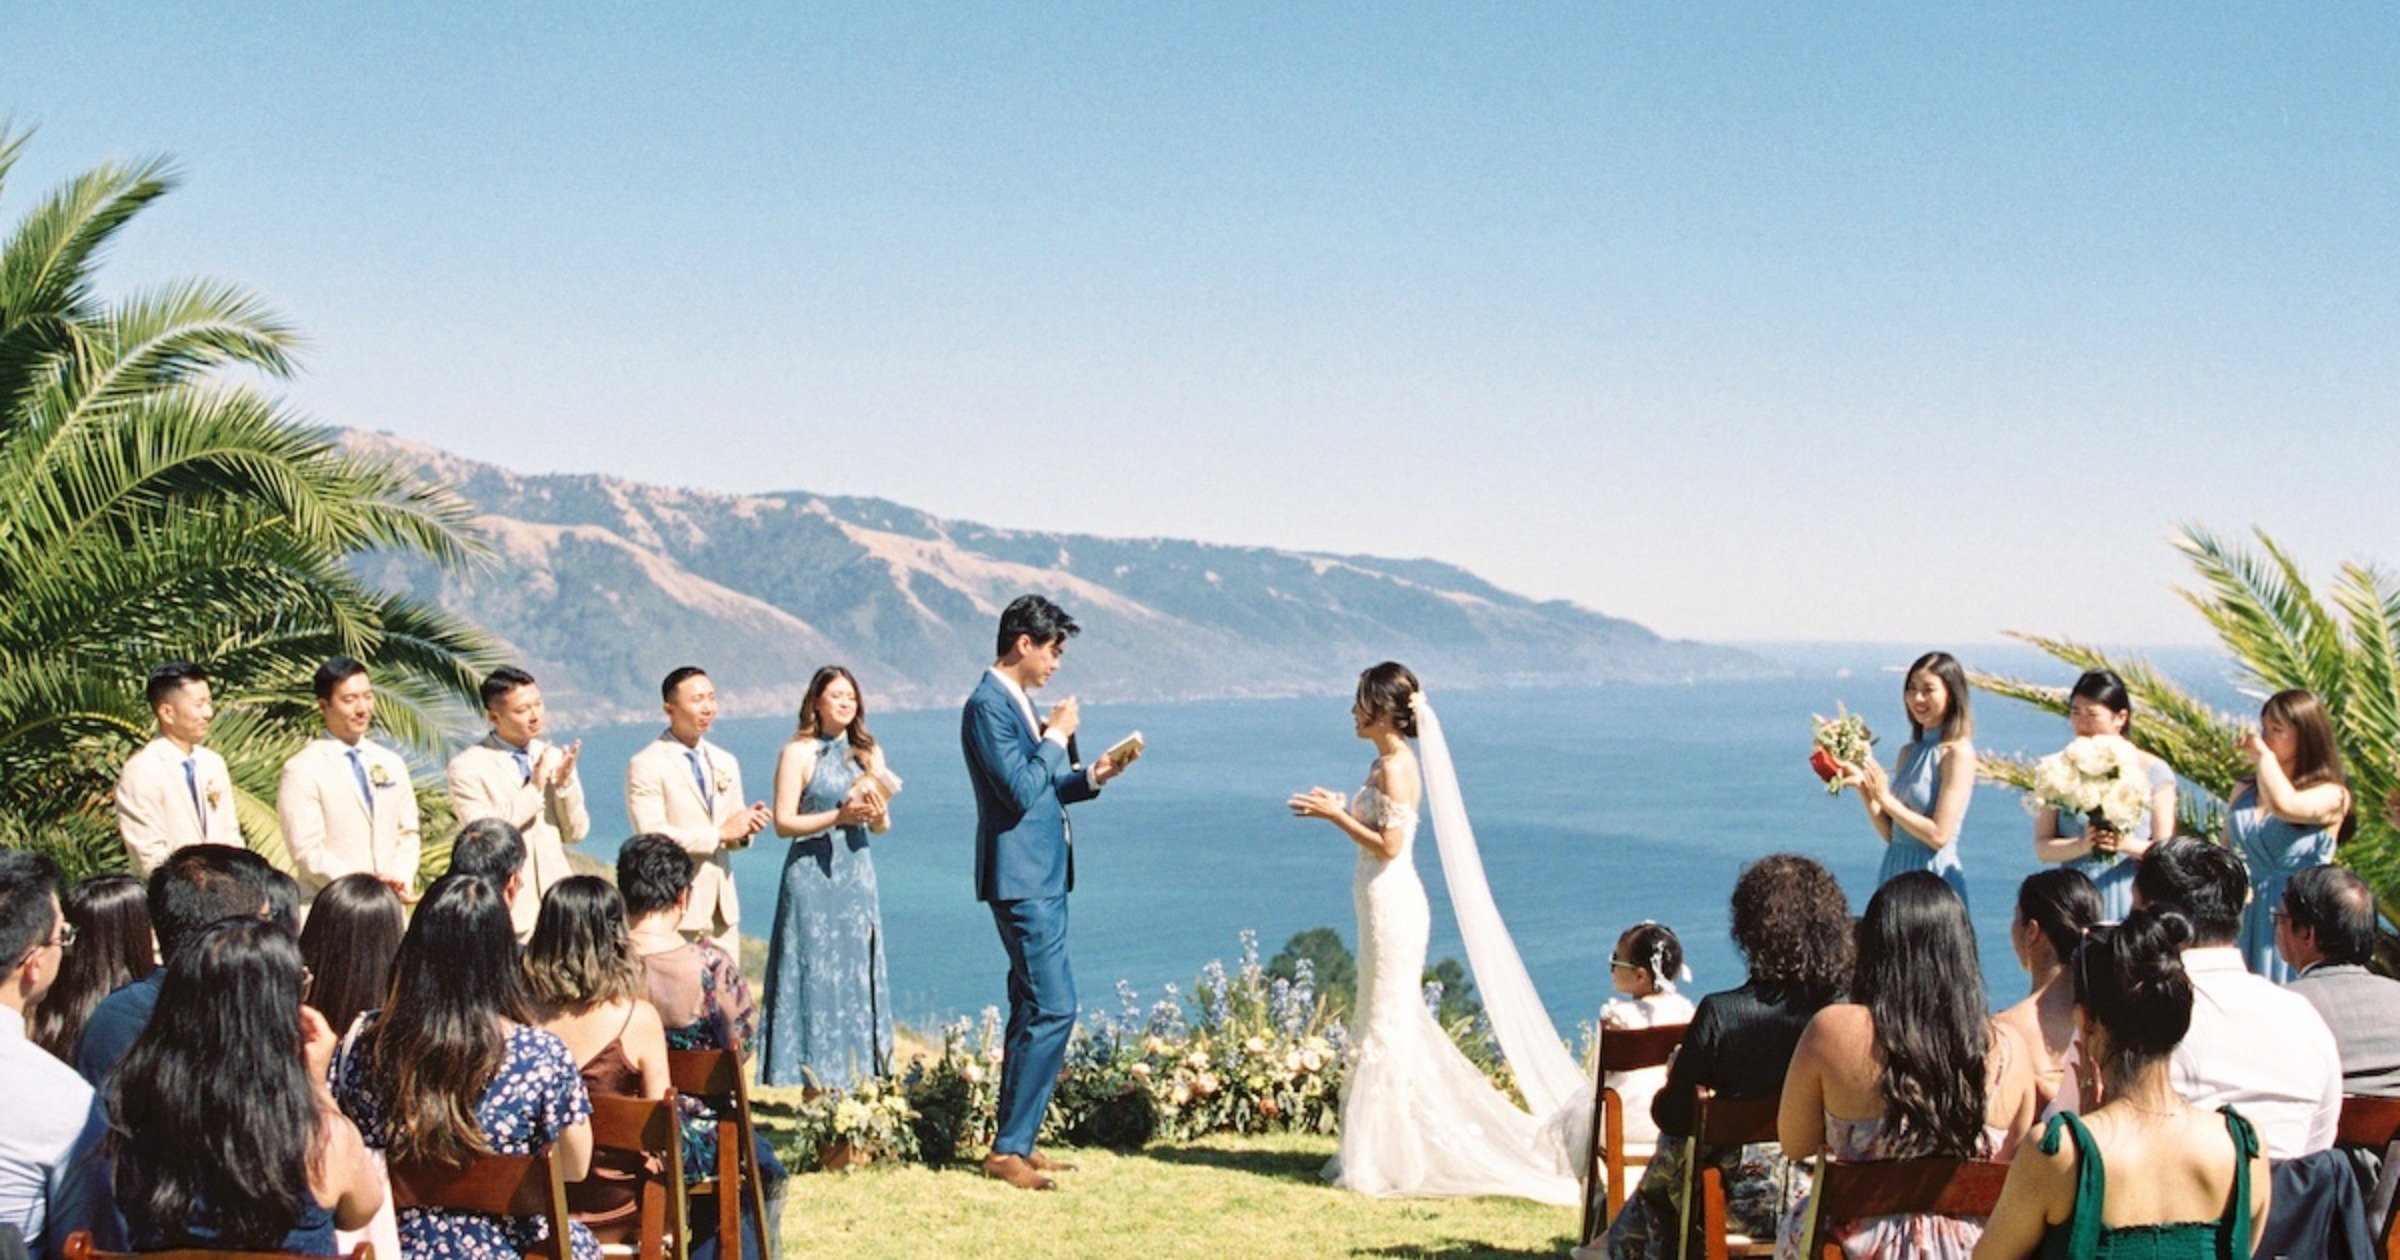 Less is More at this Ocean Front Wedding in Big Sur